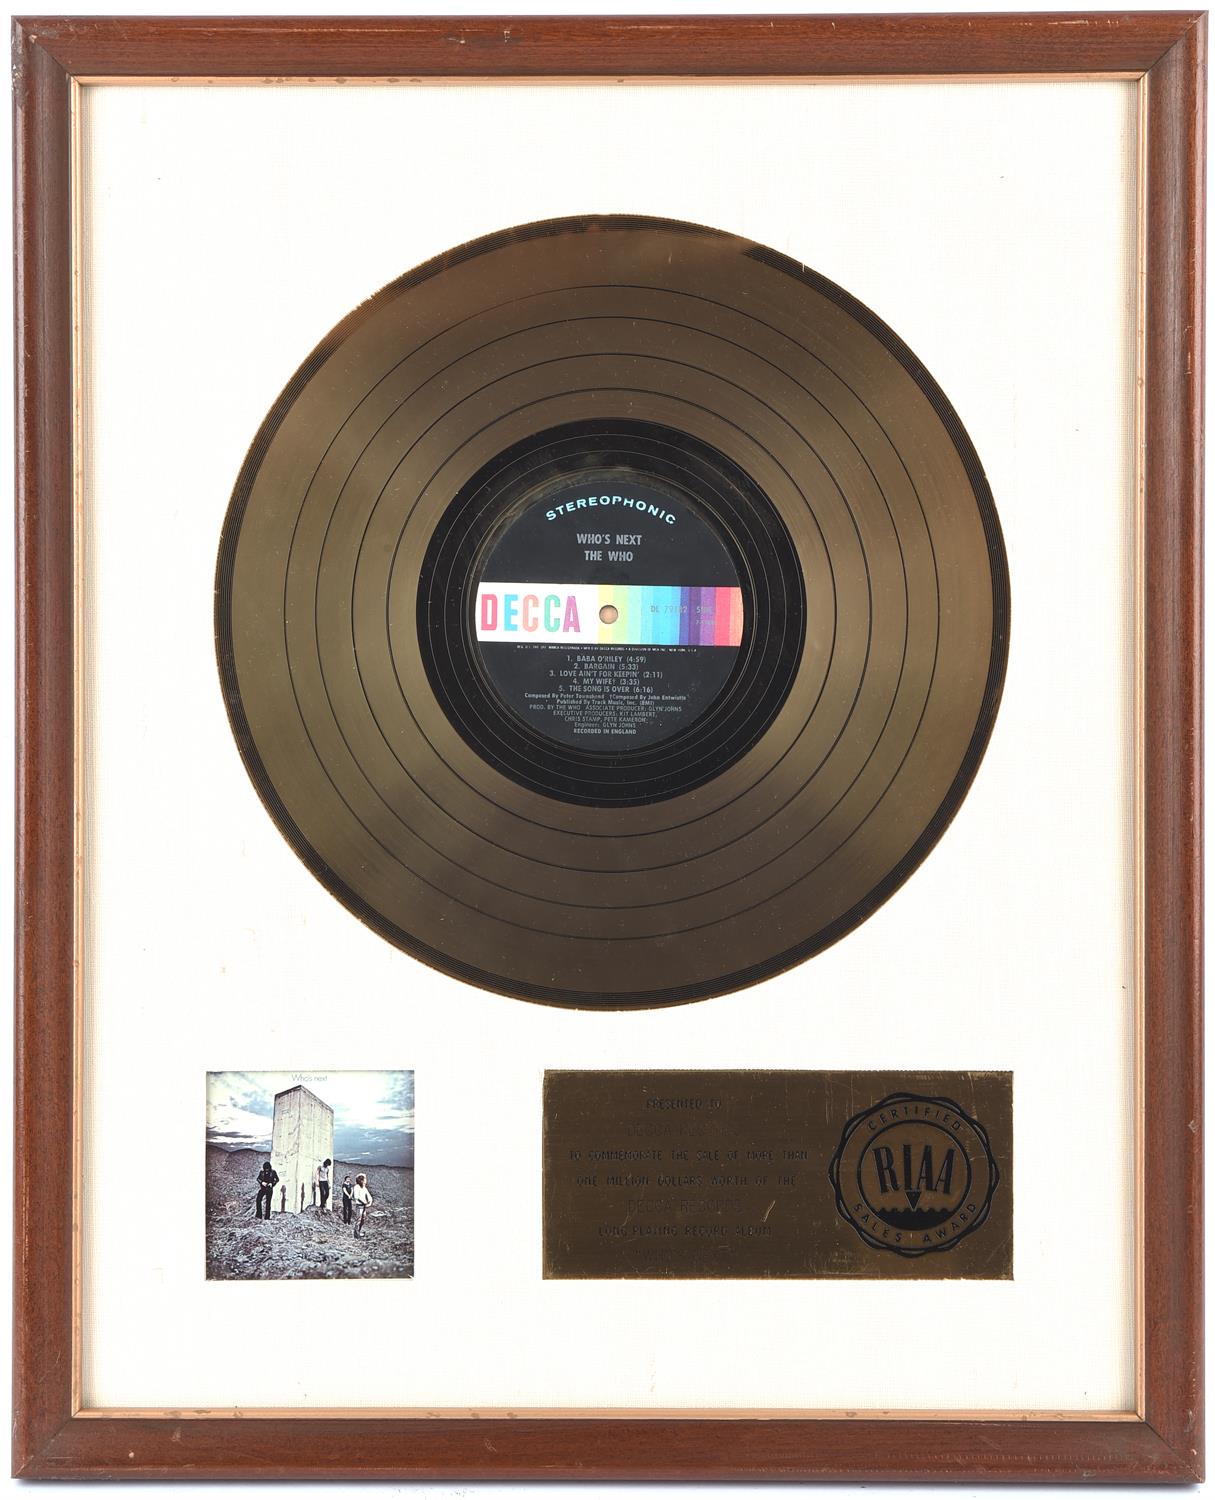 The Who: ‘Who’s Next’, RIAA certified Sales Award Gold disc, presented to Decca Records for sales